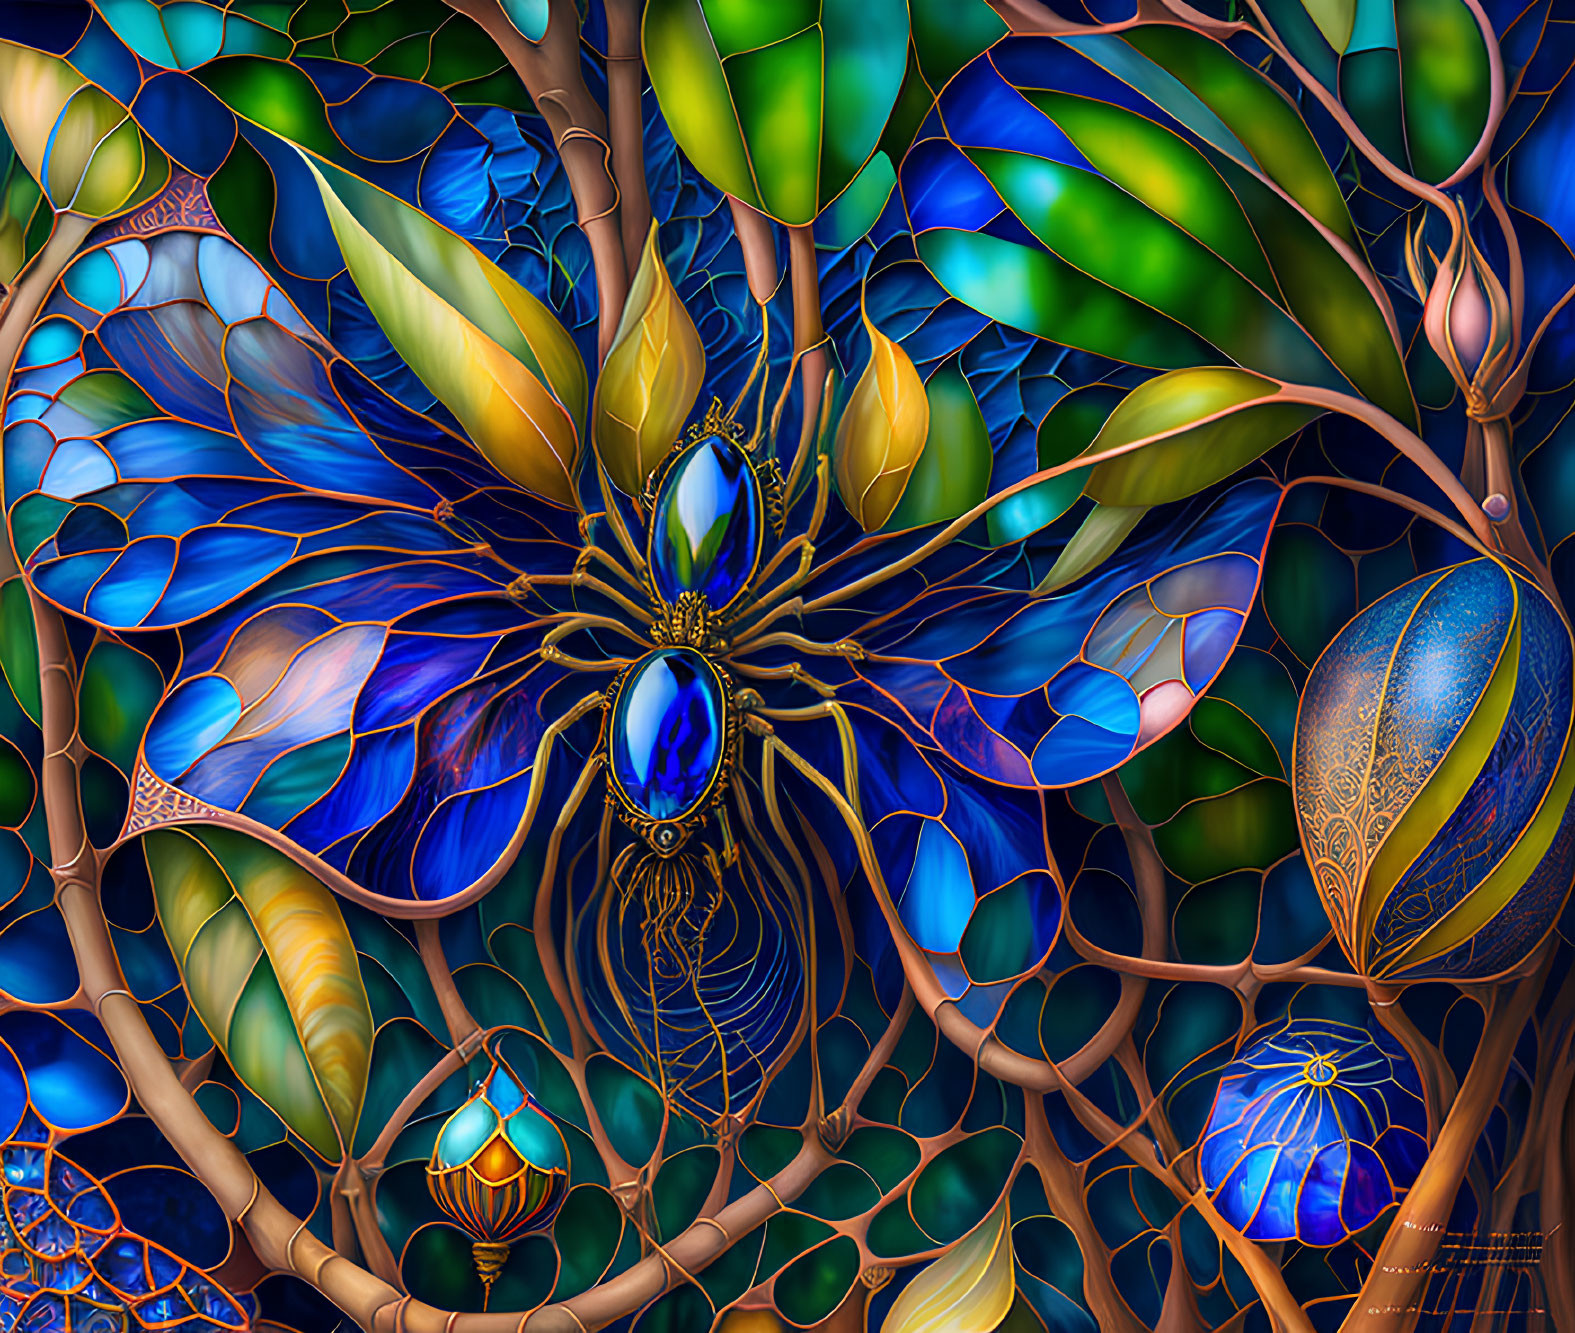 Colorful Stained Glass-Inspired Digital Artwork with Abstract Floral Design